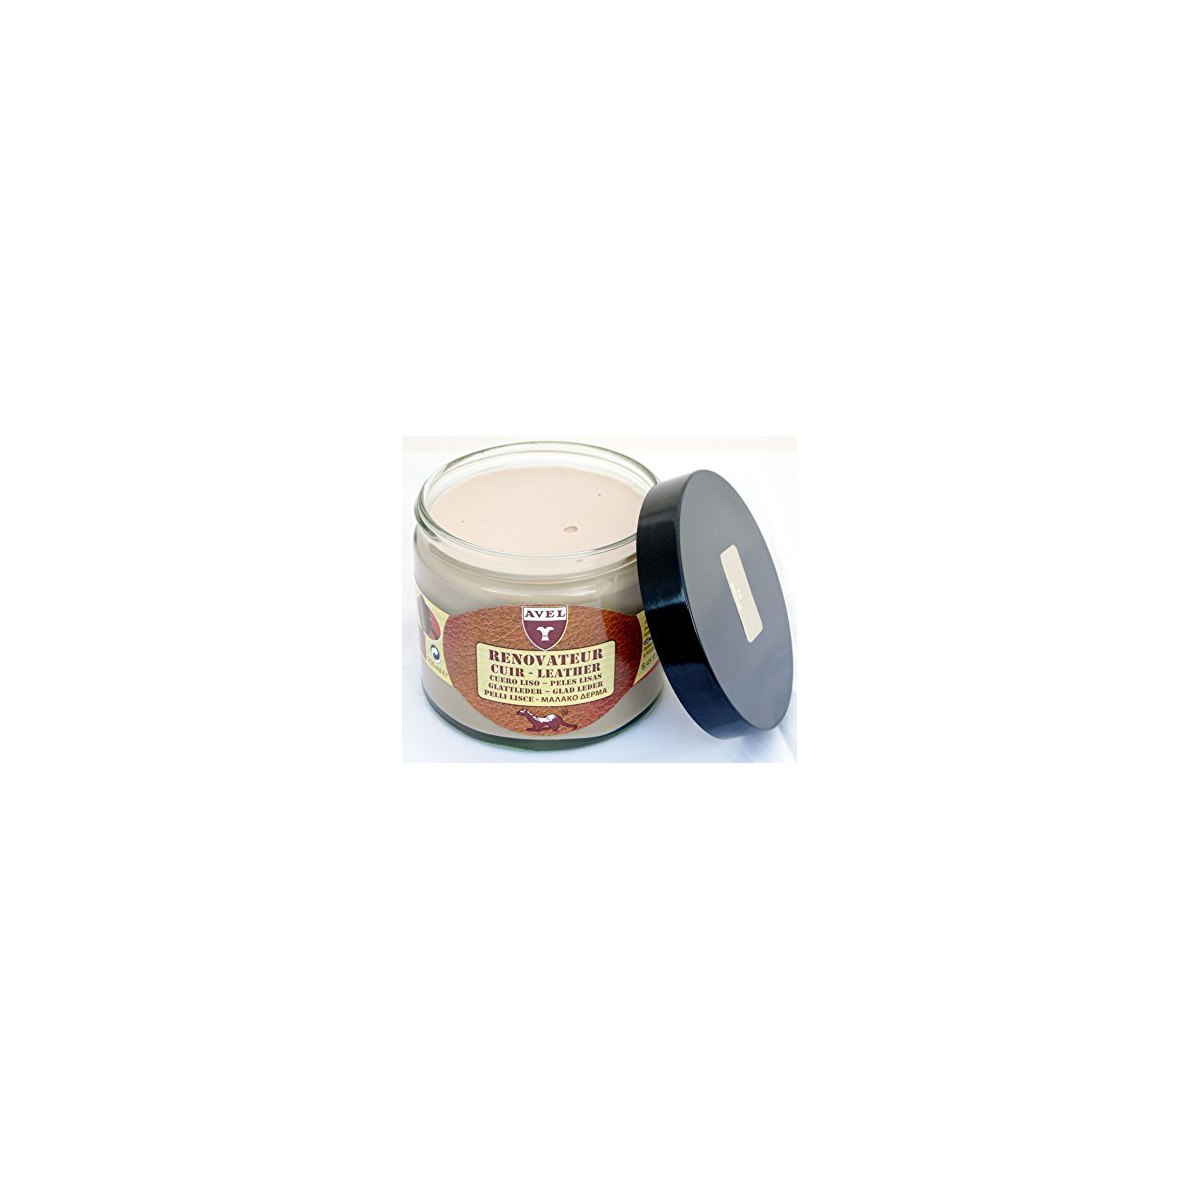 Avel Leather Renovator Recolouring Balm Beige 250ml (Number 16)